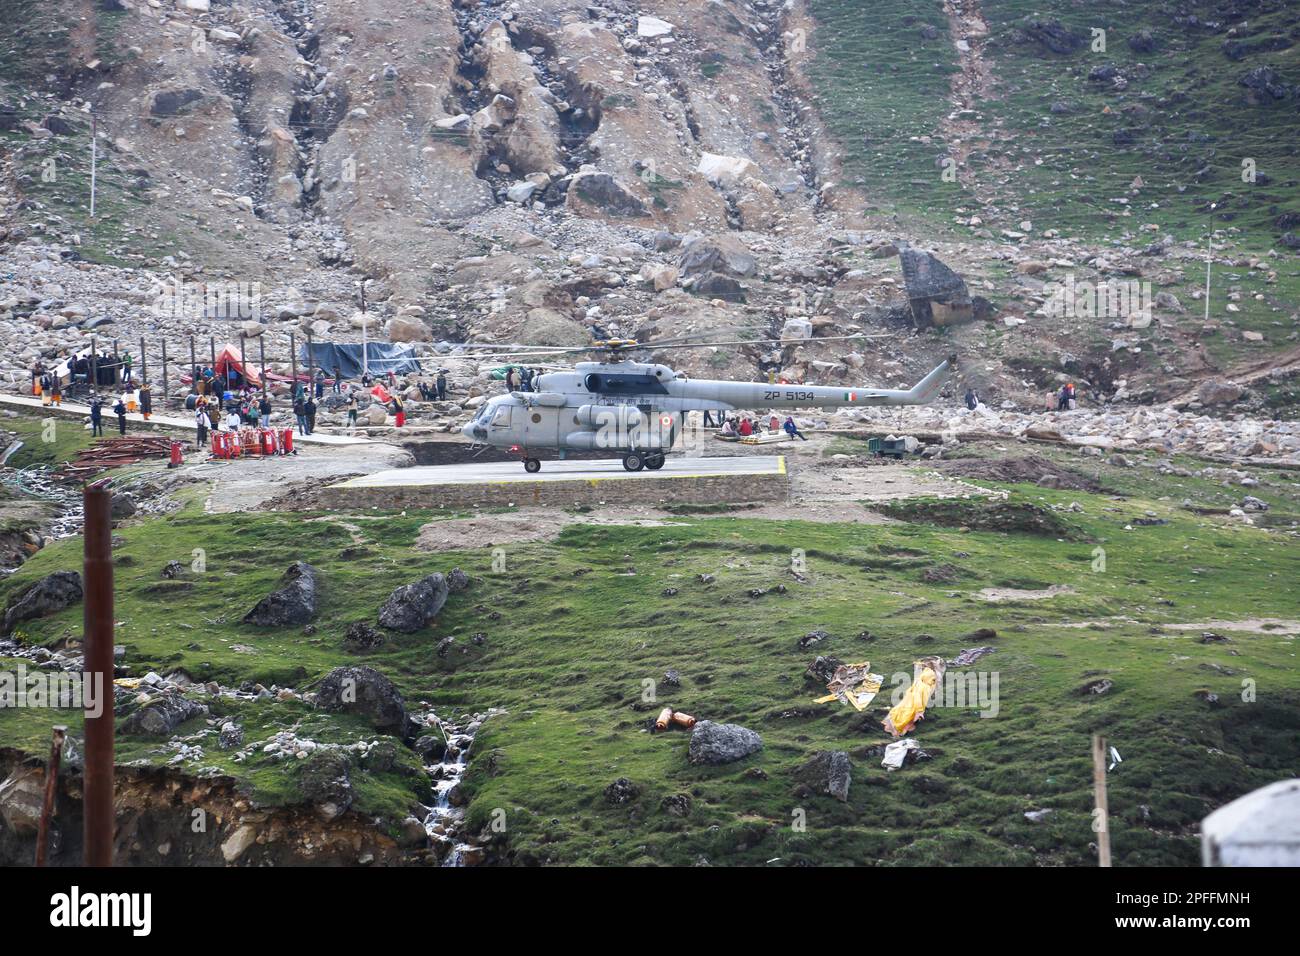 Indian air force aircraft reached for relief work in Kedarnath disaster. In June 2013, a multi-day cloudburst centered on the North Indian state of Ut Stock Photo